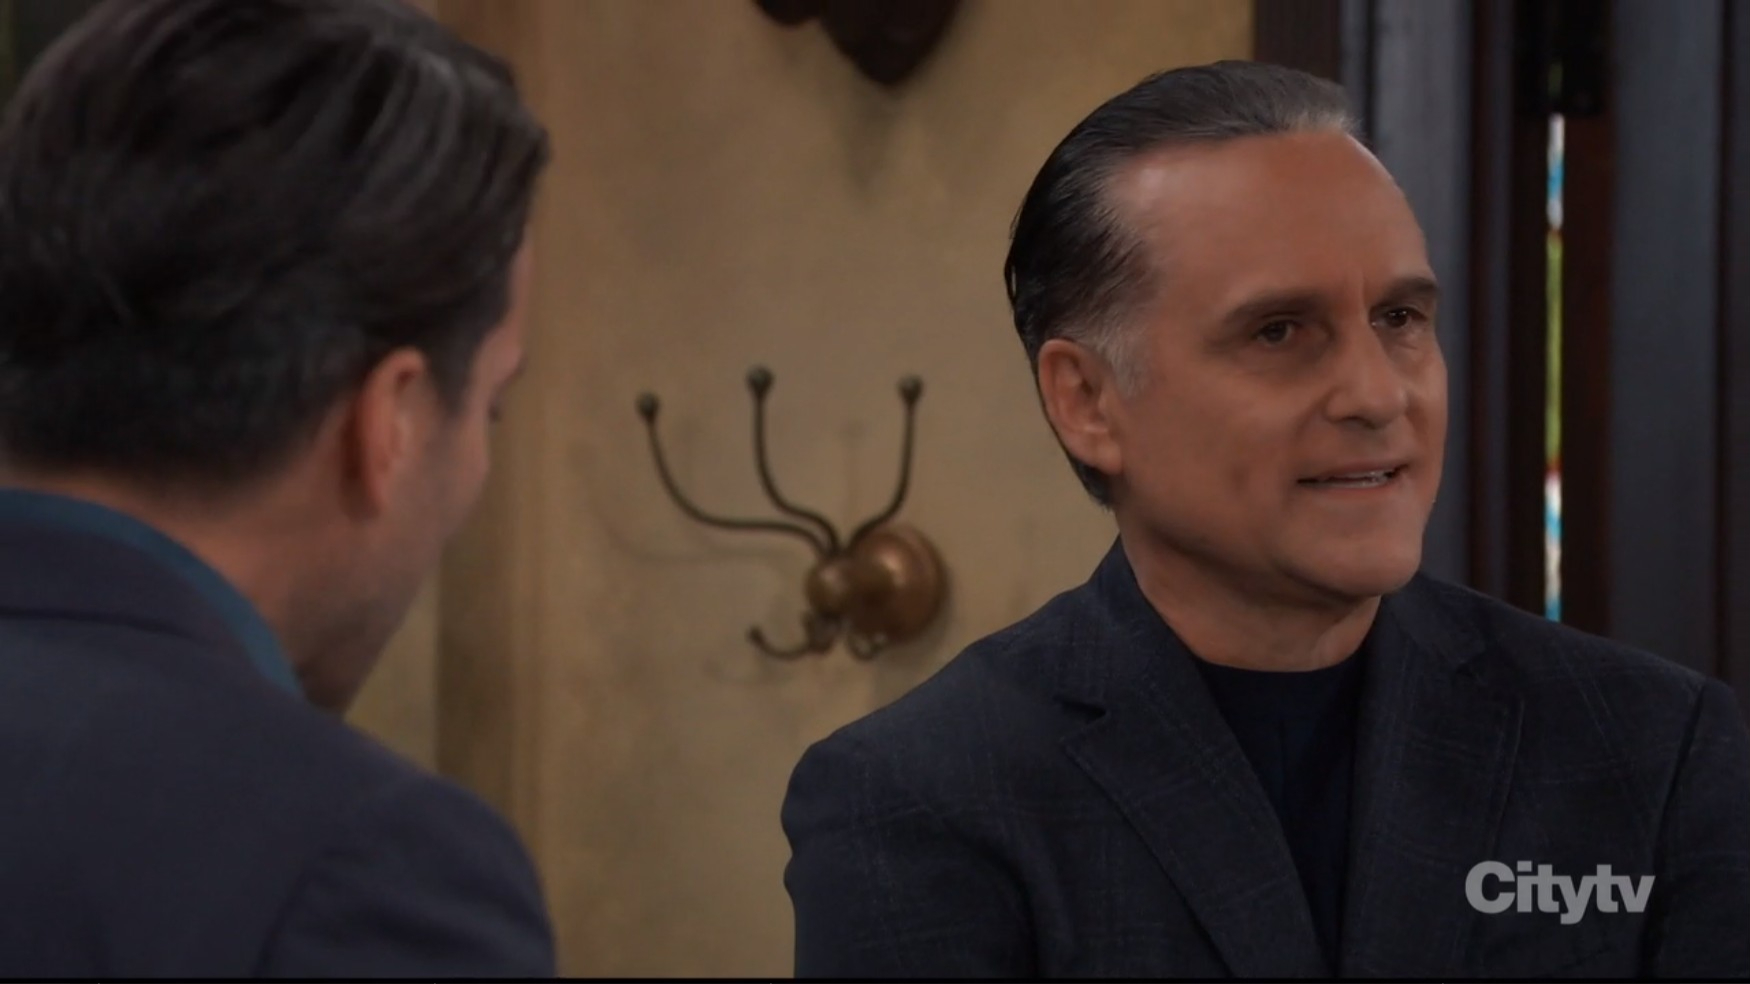 sonny with son dante GH recaps soapsspoilers